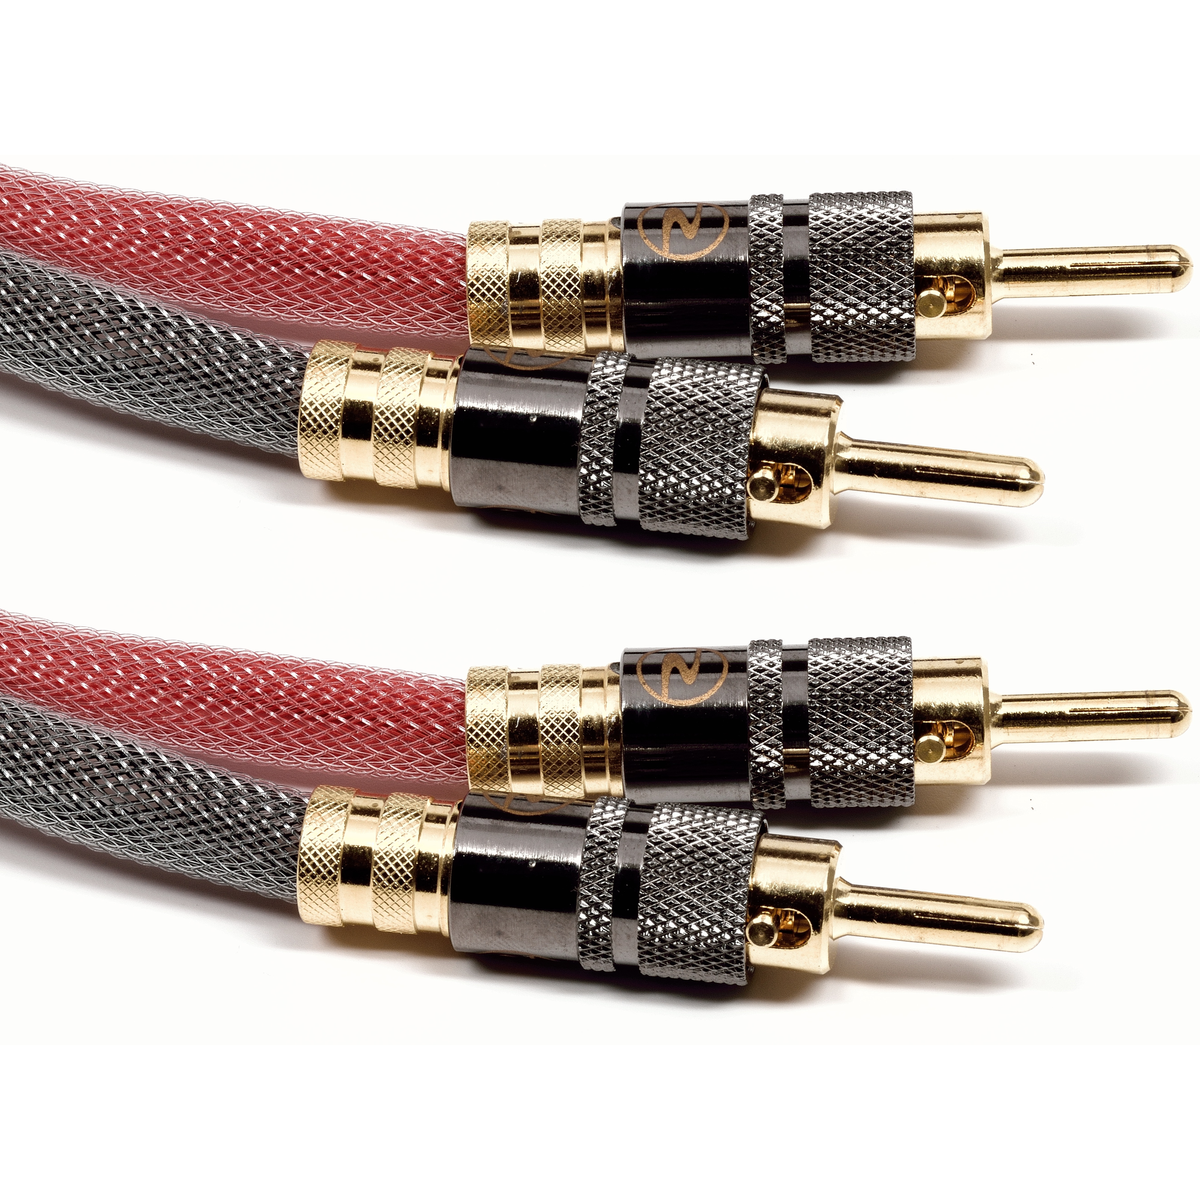 Benchmark Banana to Banana Speaker Cable with Locking Connectors